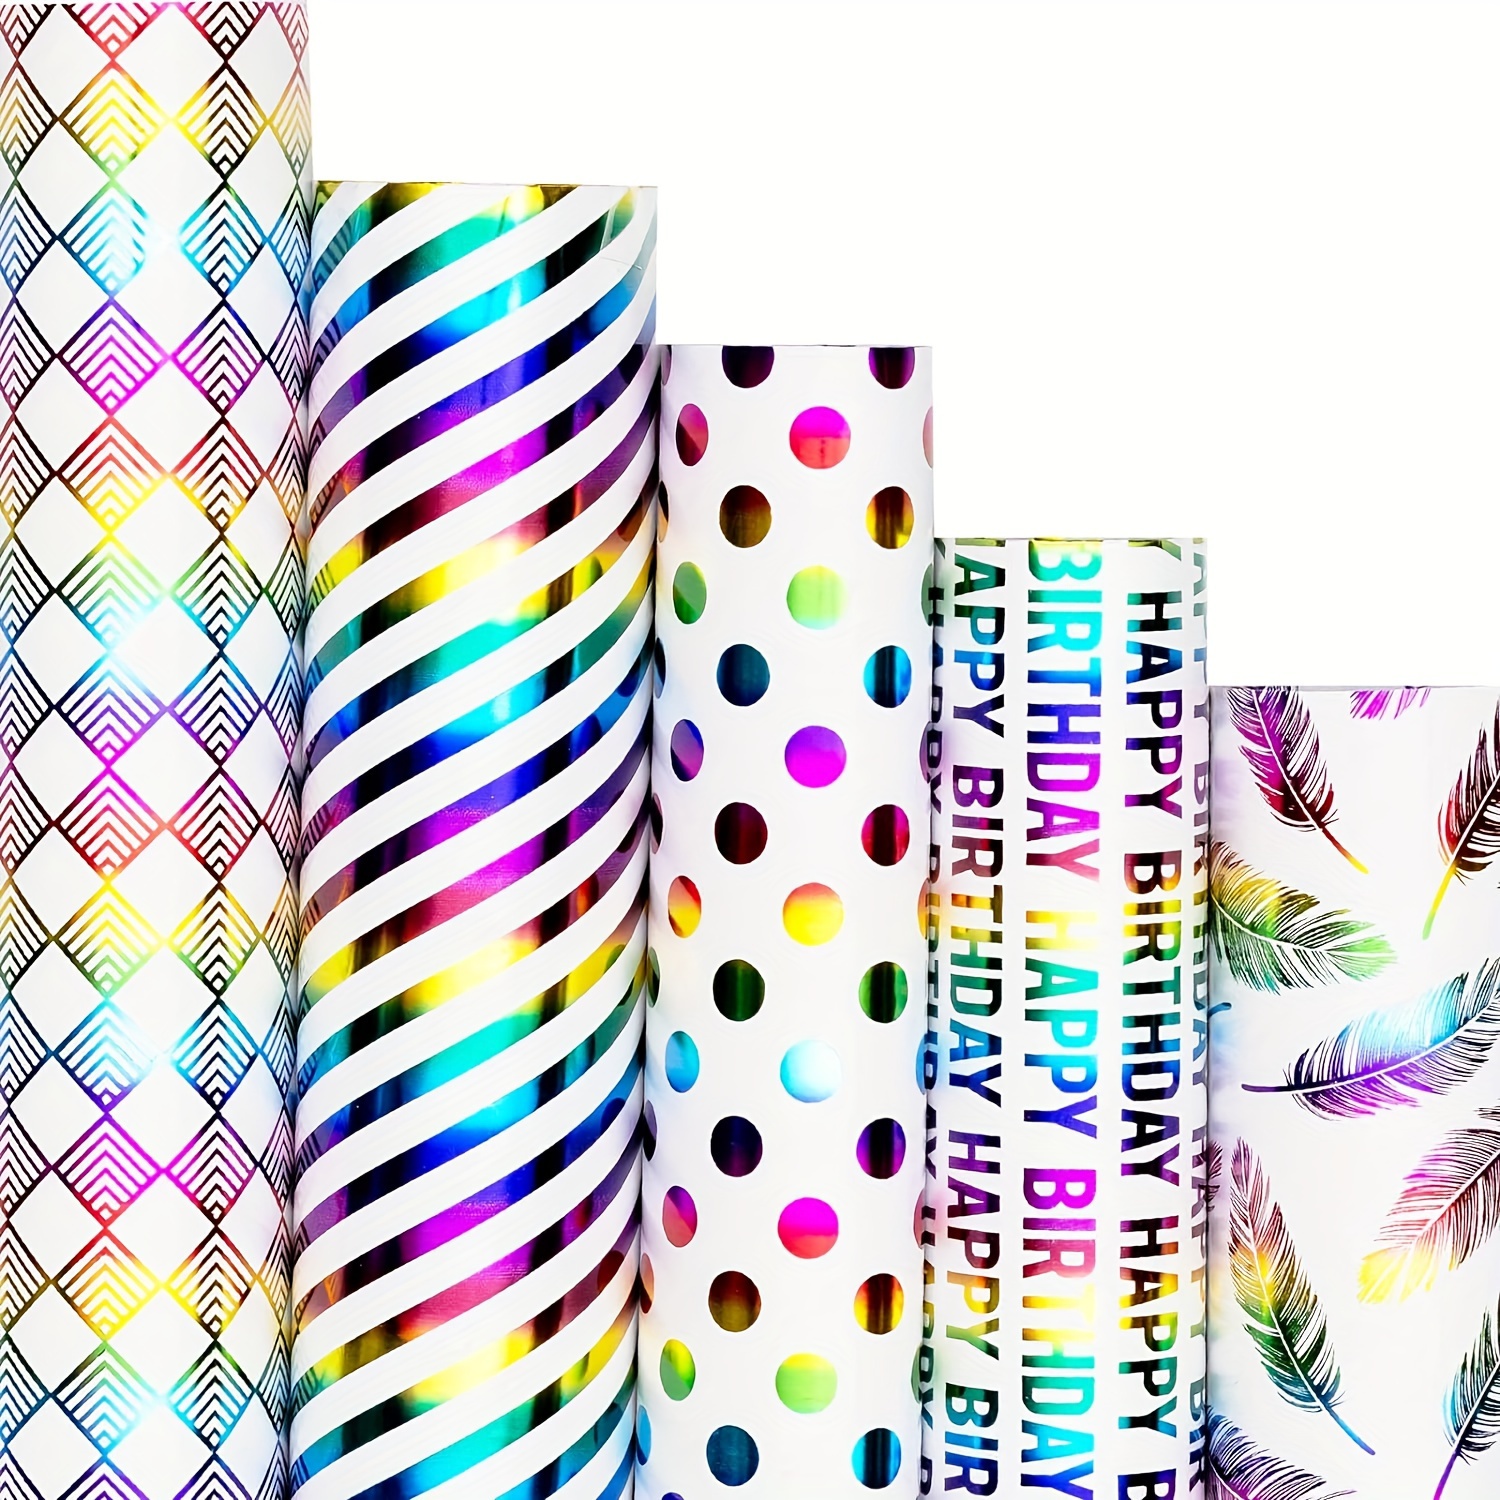 

5 Rolls Birthday Wrapping Paper Roll - Mini Roll - 19.7 Inch X 27.5 Inch Per Roll - Colorful Foil Birthday Design For Party, Holiday, Baby Shower